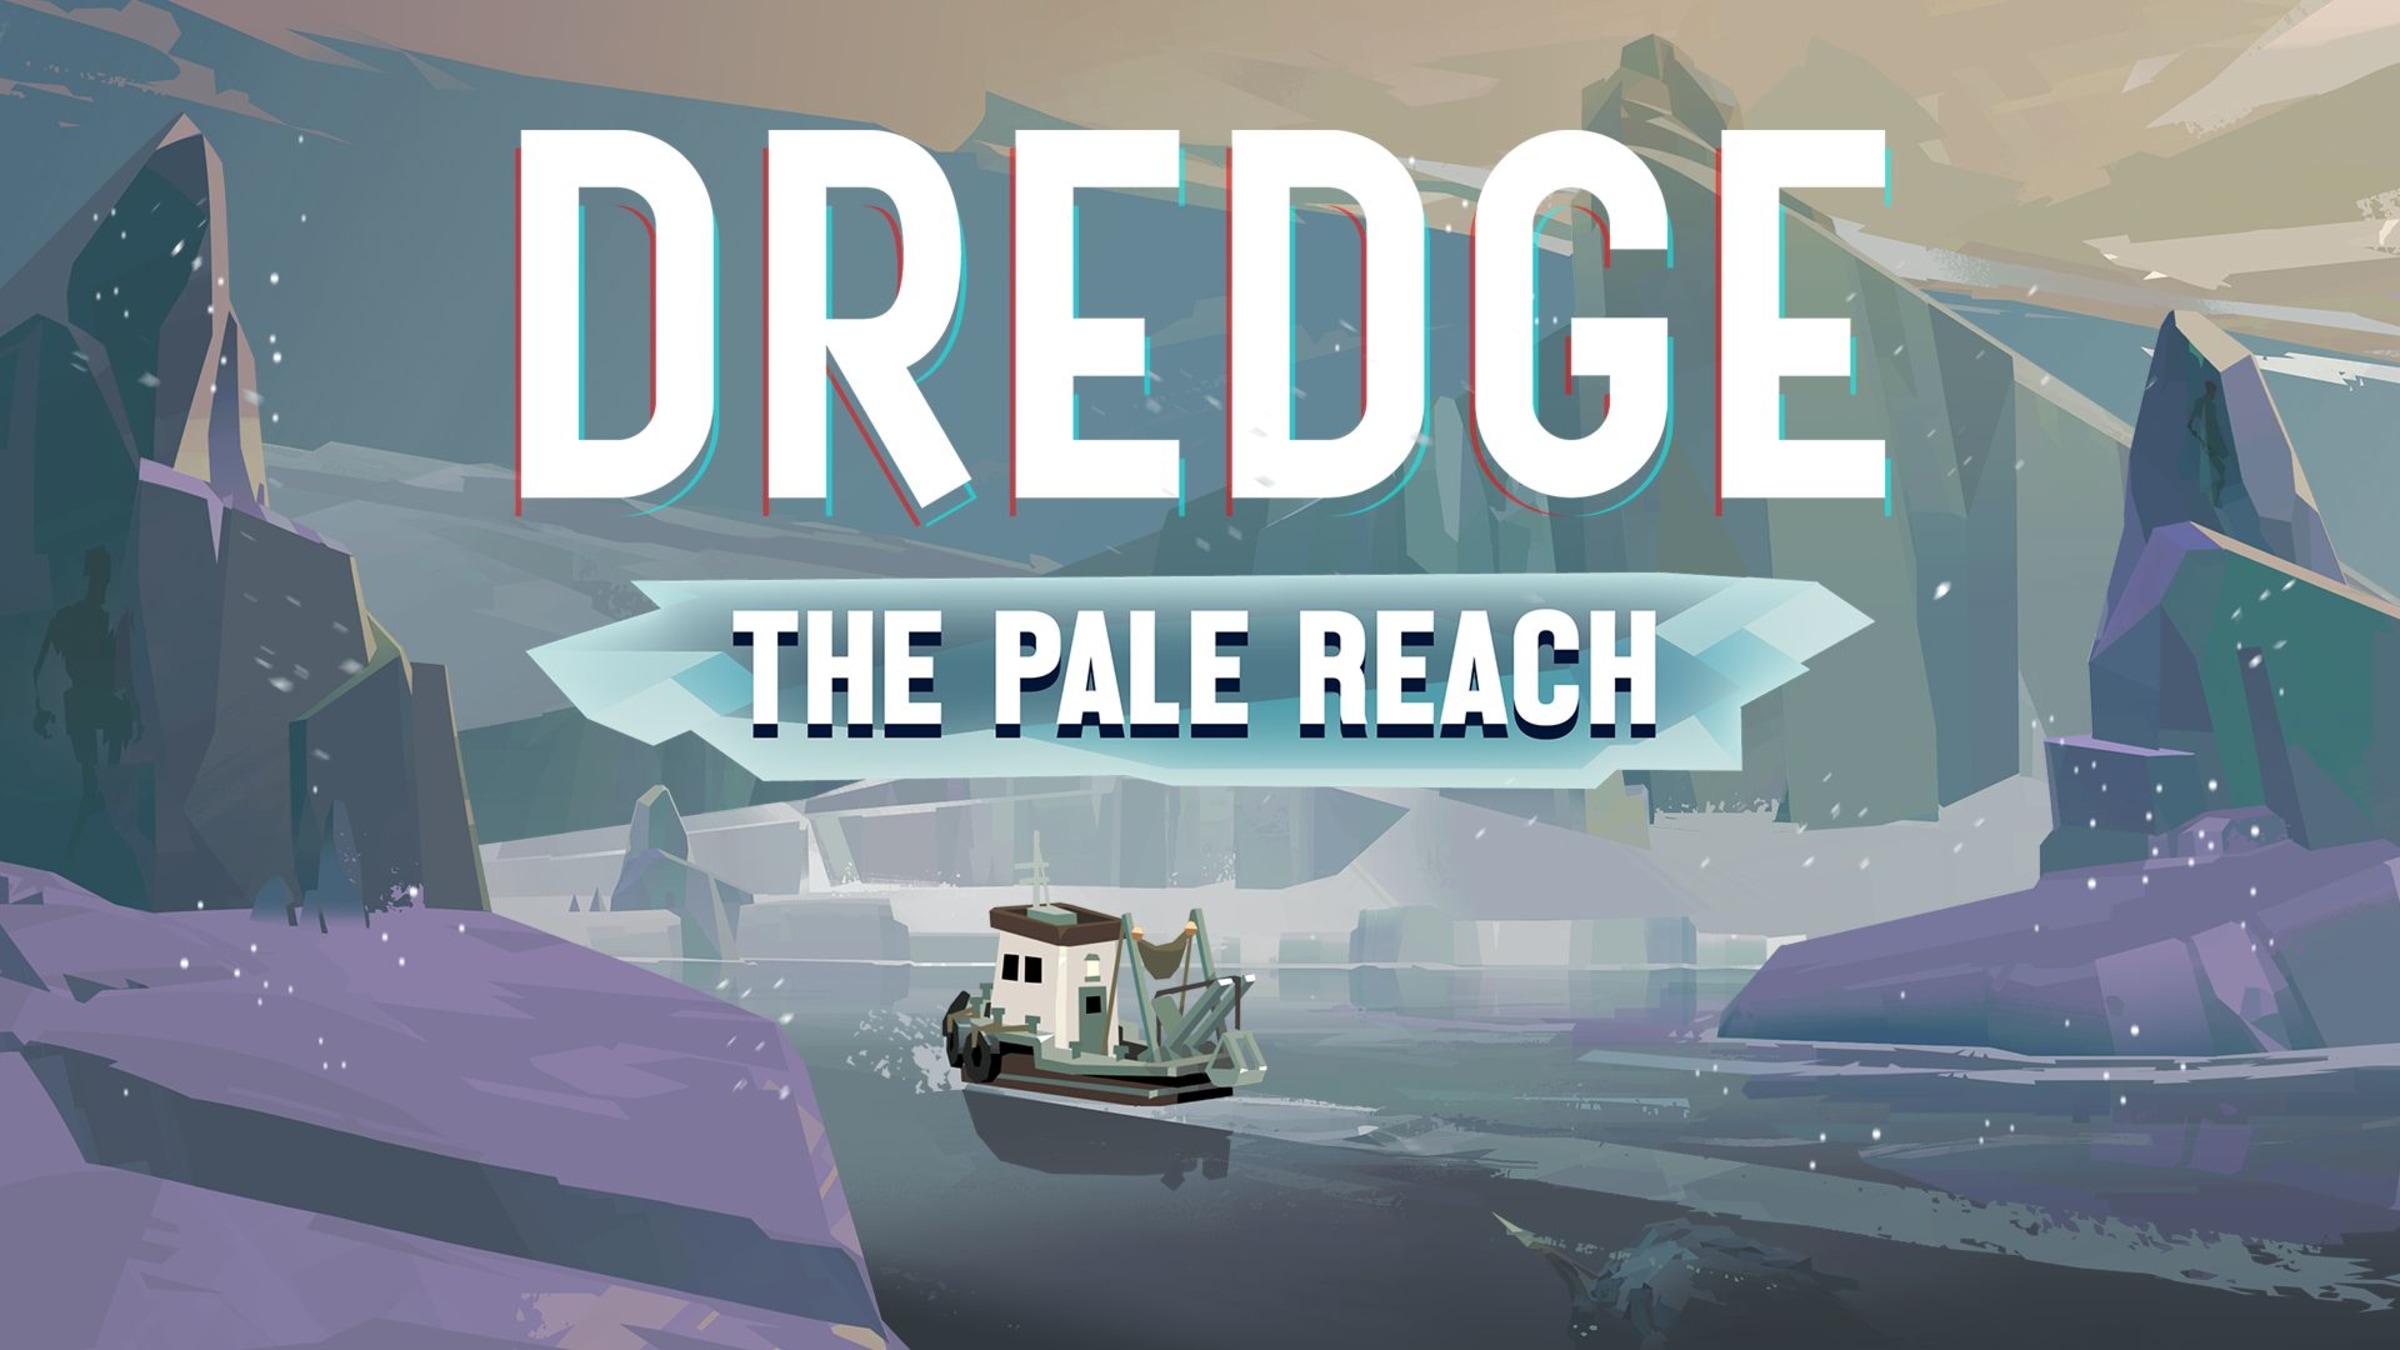 Buy DREDGE Deluxe Edition Nintendo Switch Game